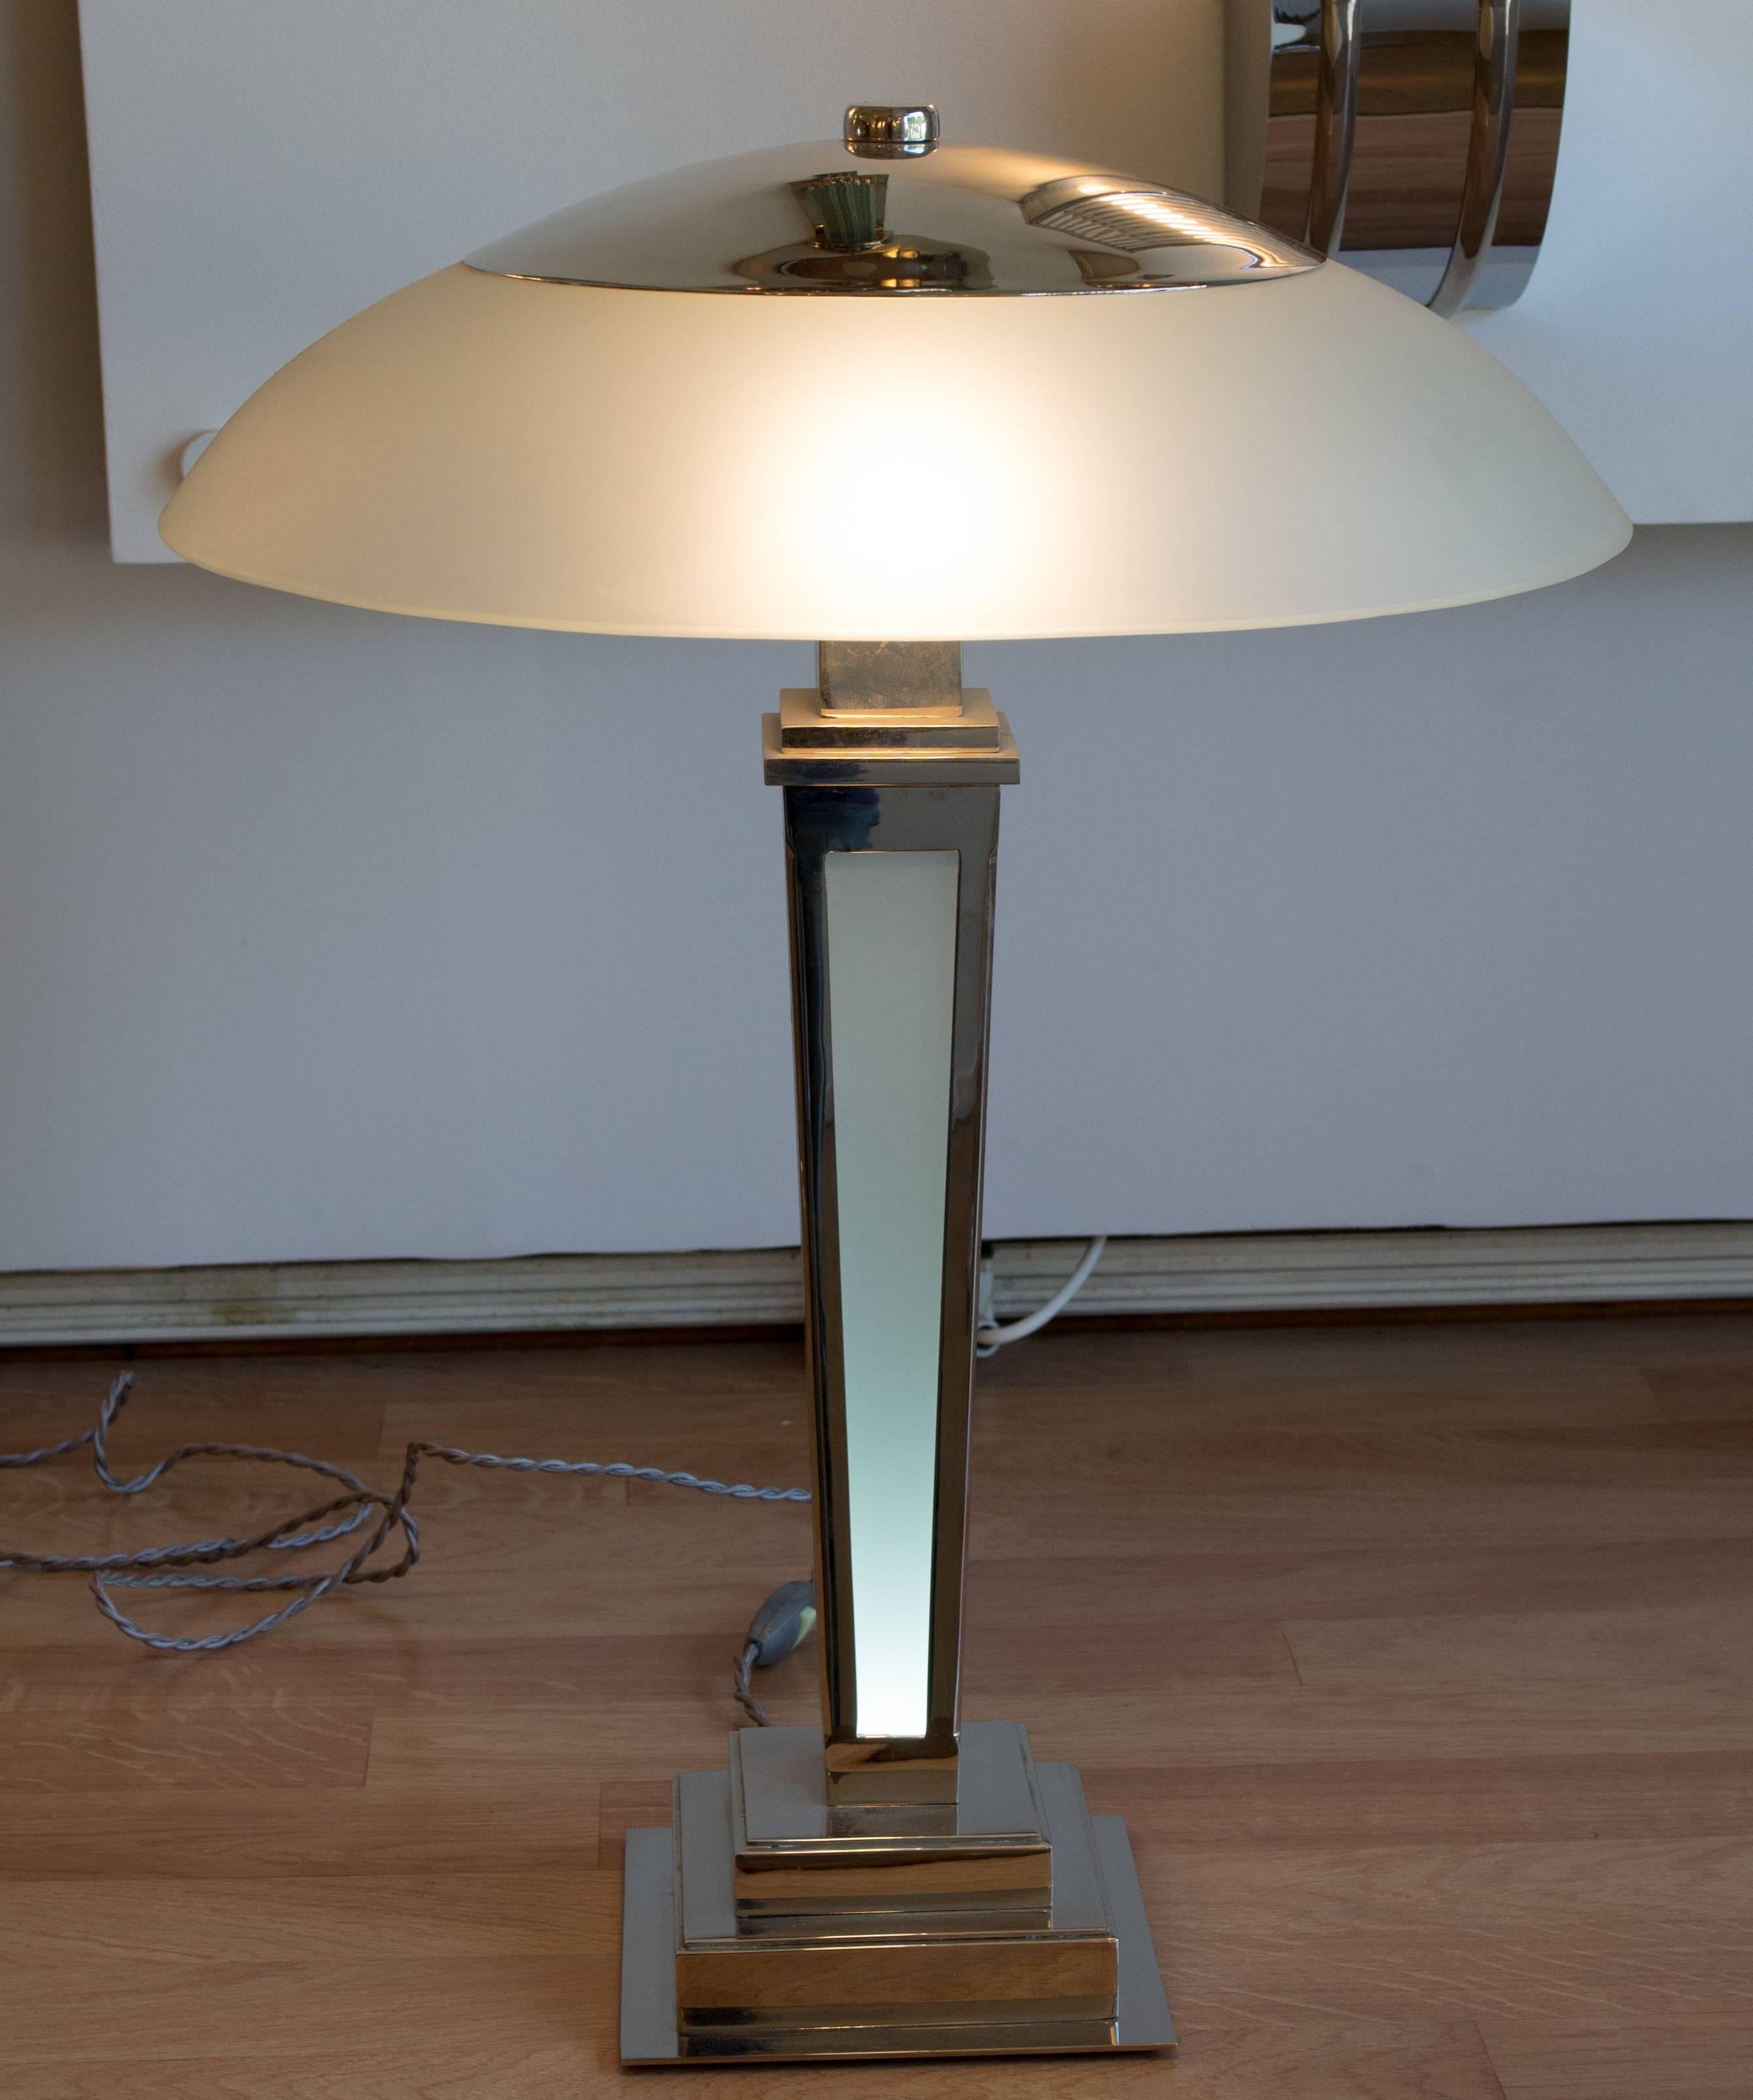 Art Deco lamp with led in the foot.